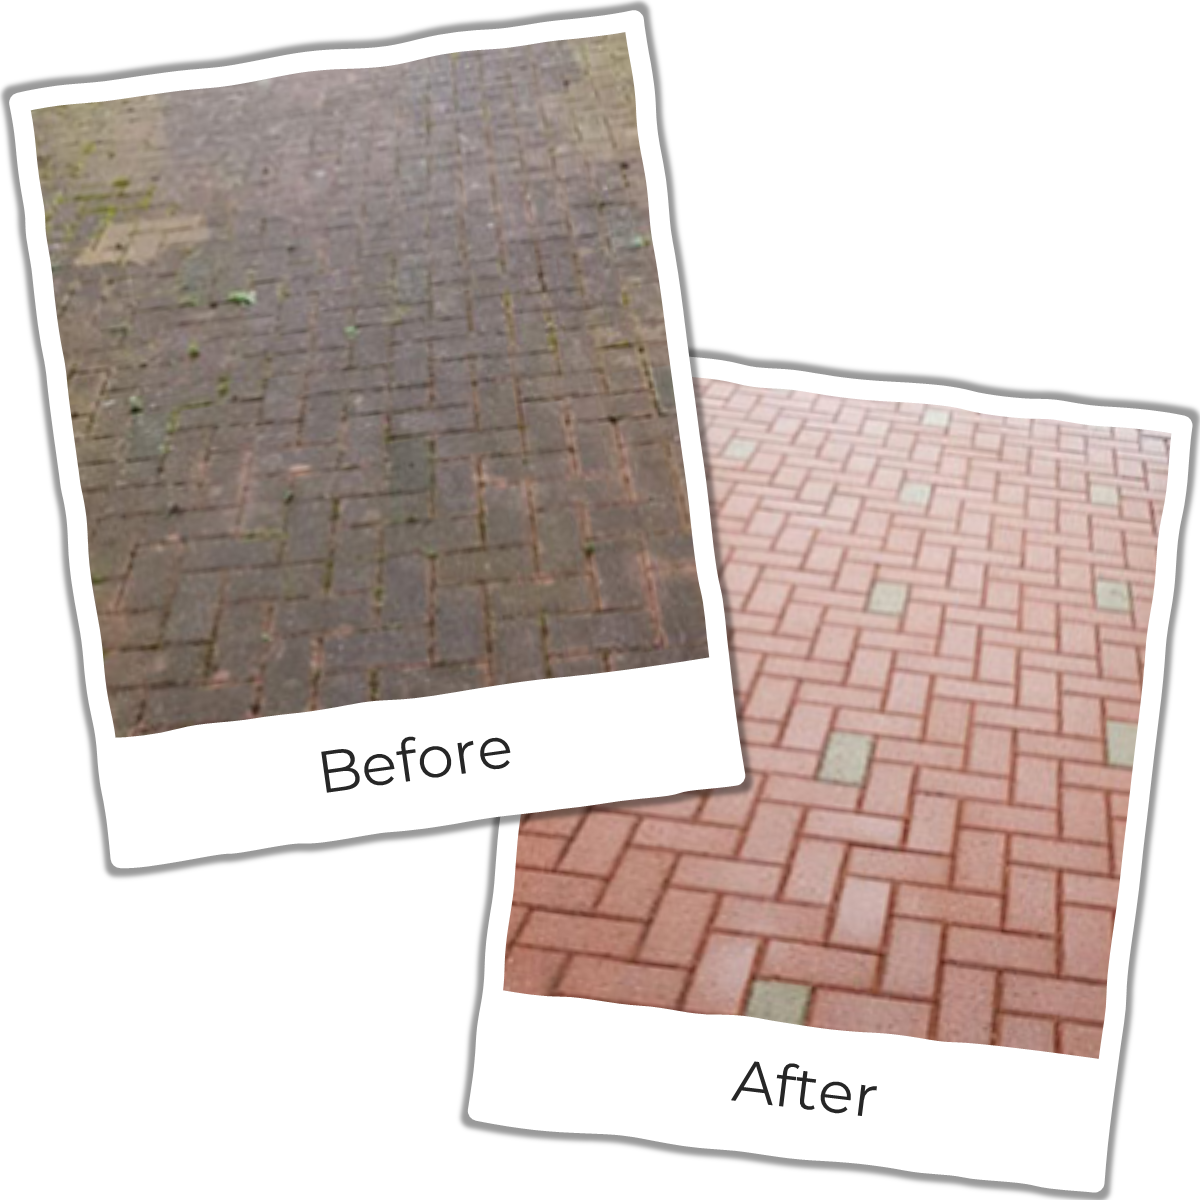 Before and after shot of pressure cleaned pavers